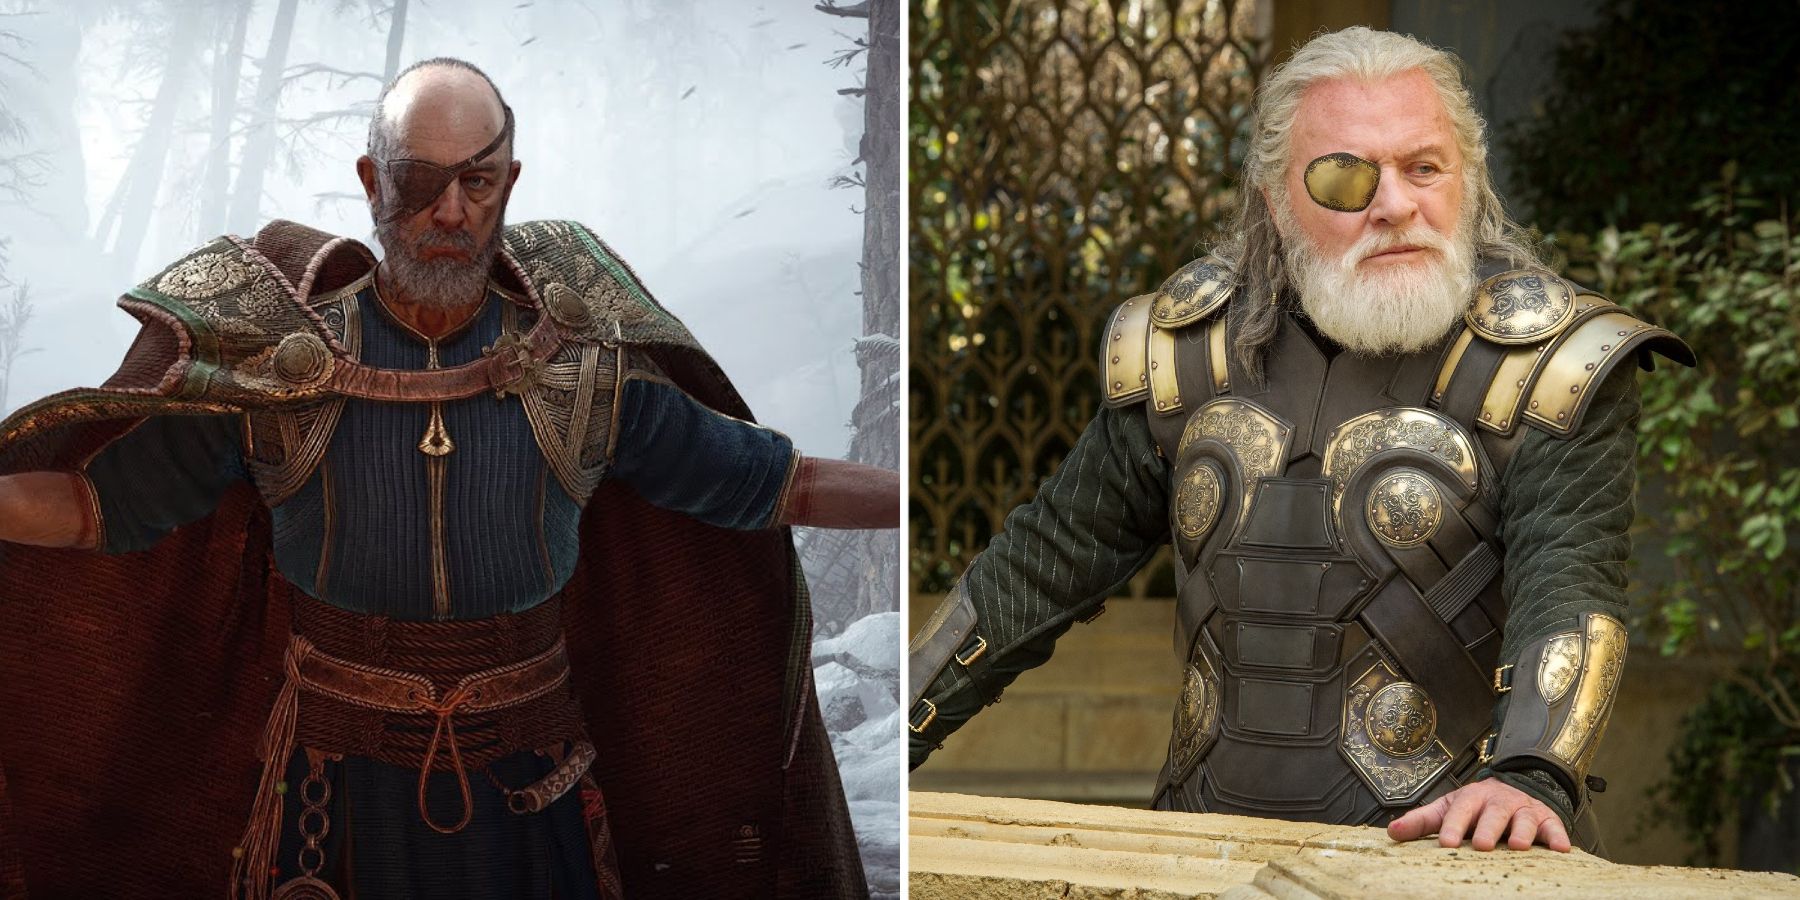 While Odin introduces himself at Kratos' home in God of War Ragnarok, Odin stands on the balcony in Thor.